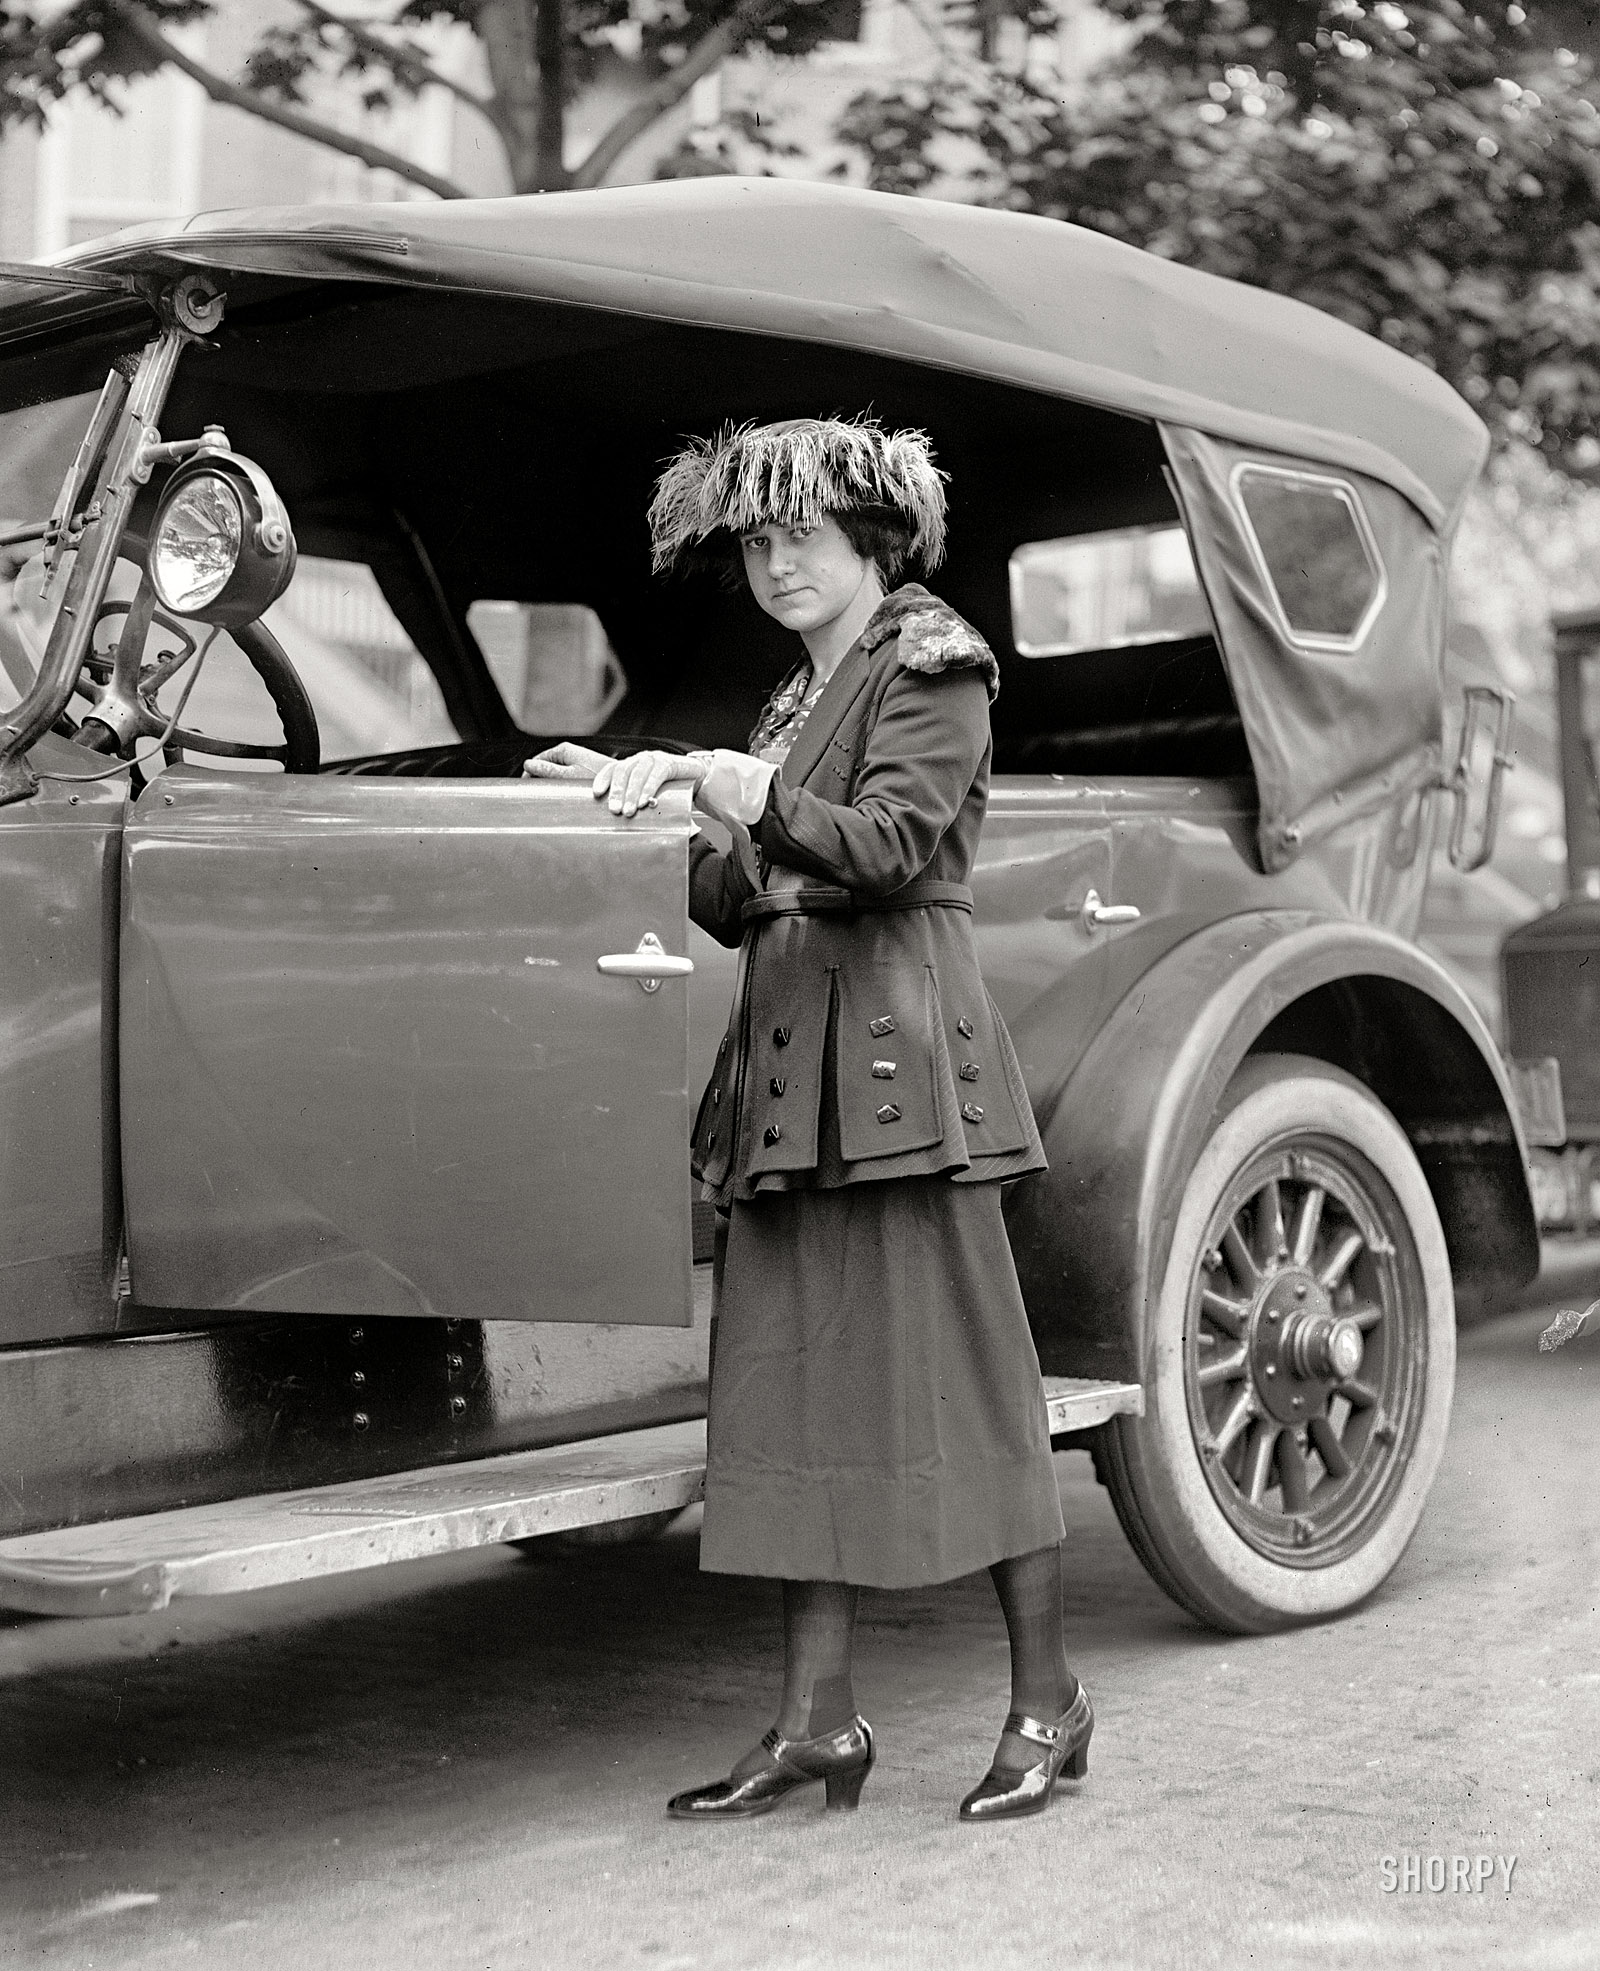 October 6, 1922. Washington, D.C. "Emily Dial, daughter of Senator Dial." National Photo Company Collection glass negative. View full size.